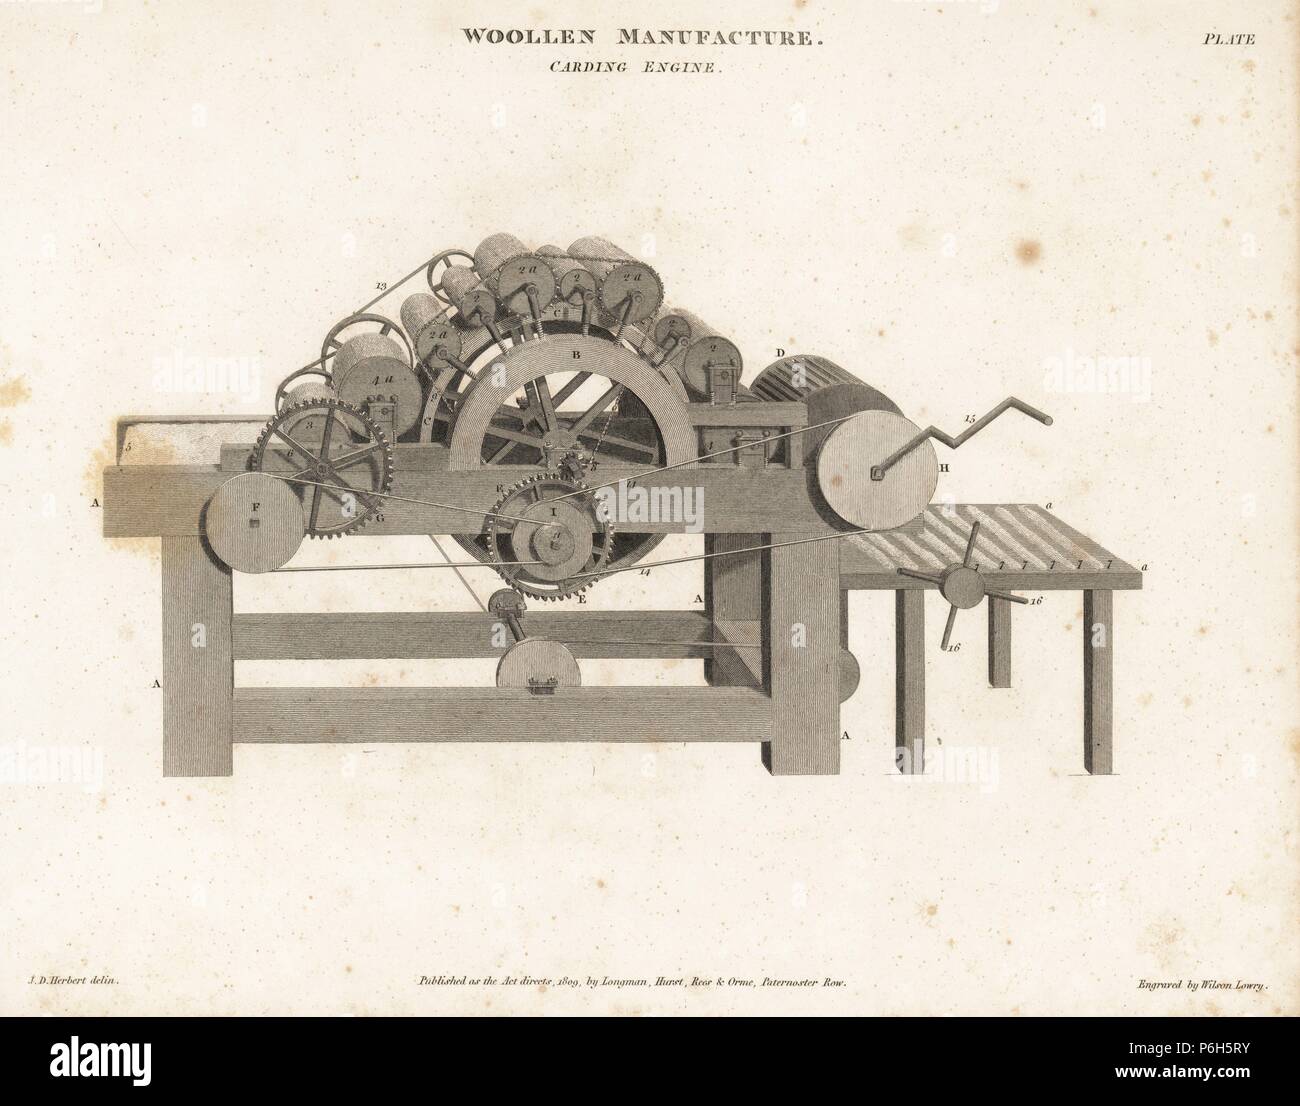 Carding engine used for wool manufacture, 18th century. Copperplate engraving by Wilson Lowry from Abraham Rees' 'Cyclopedia or Universal Dictionary,' London, 1809. Stock Photo